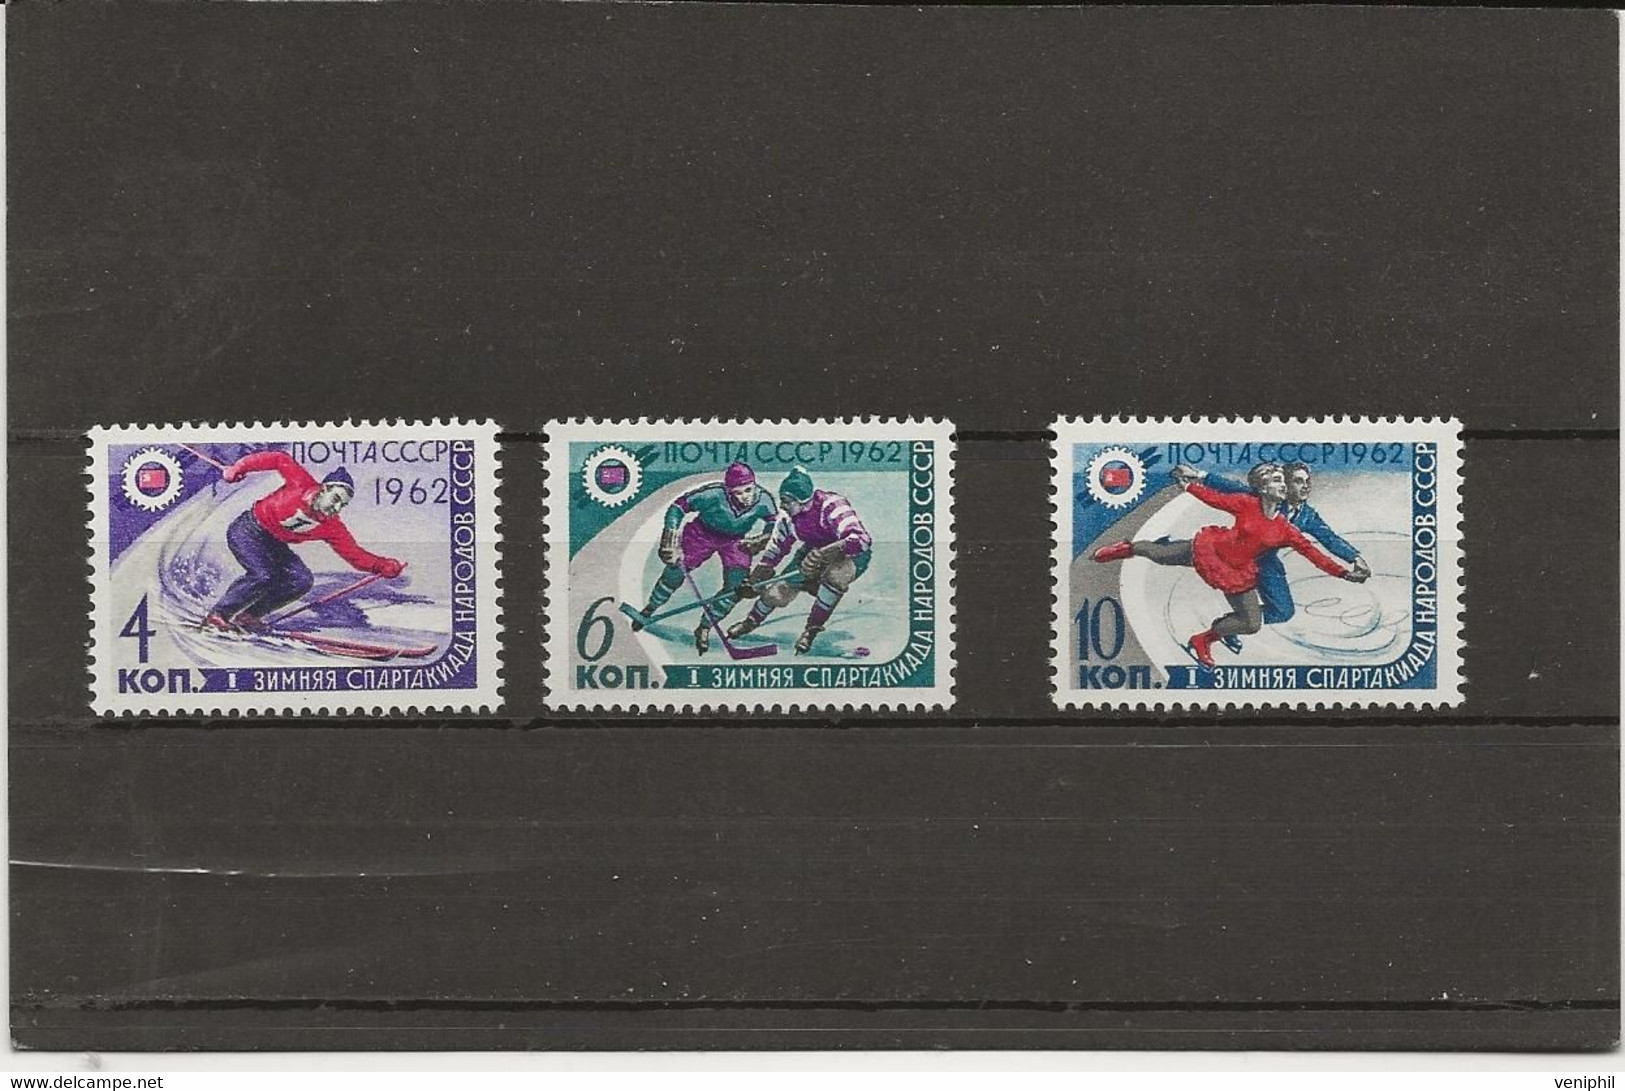 RUSSIE - SERIE 1ER JEUX SPORTIFS- N° 2500 A 2502 NEUF SANS CHARNIERE - ANNEE 1962 - Unused Stamps